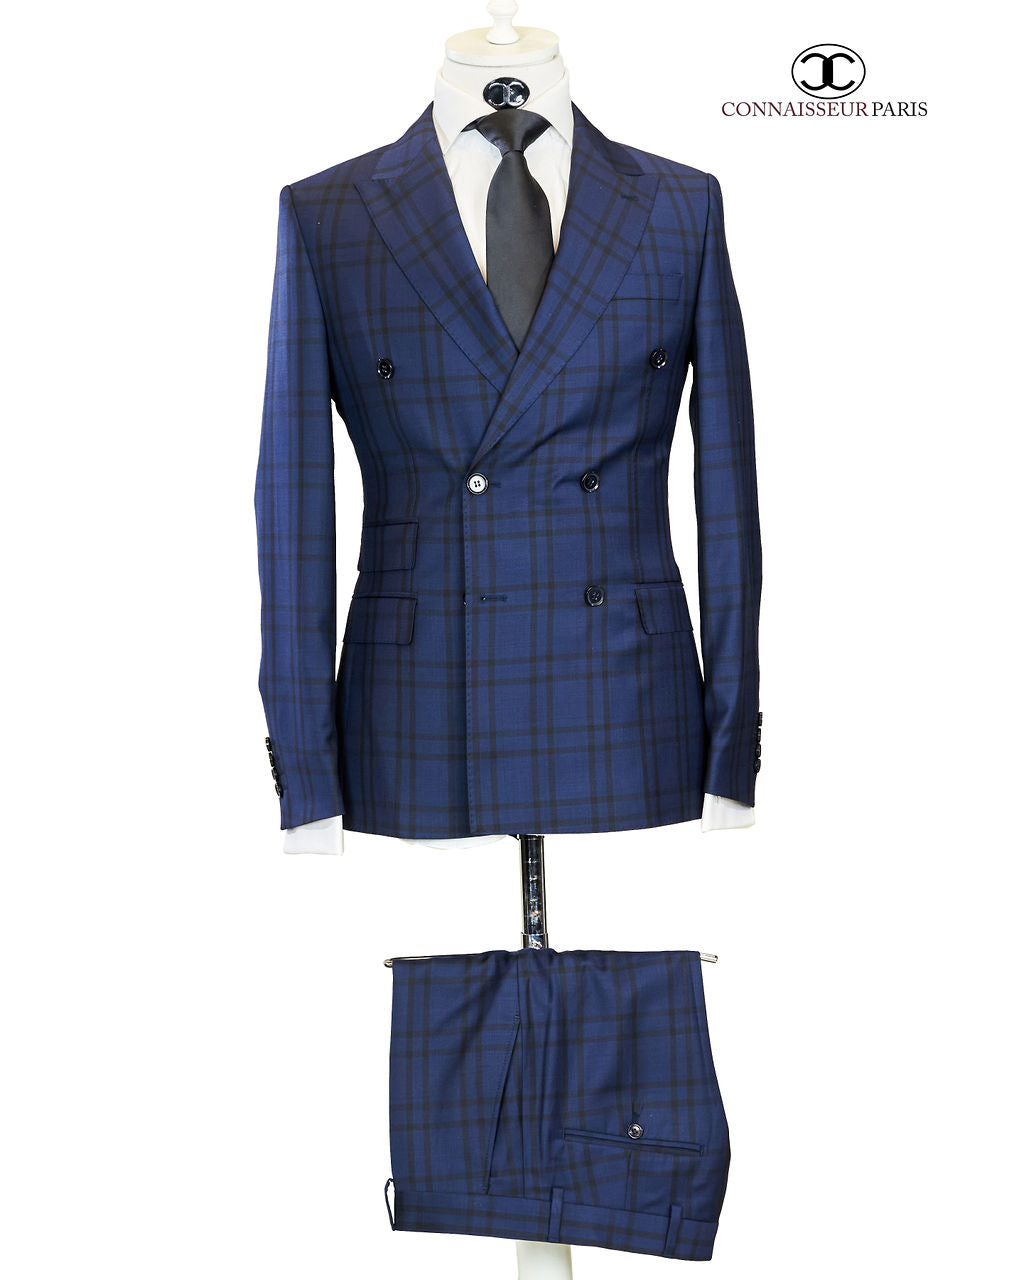 Vitale Barberis - Navy blue with black plaid double breasted 2-piece slim fit suit